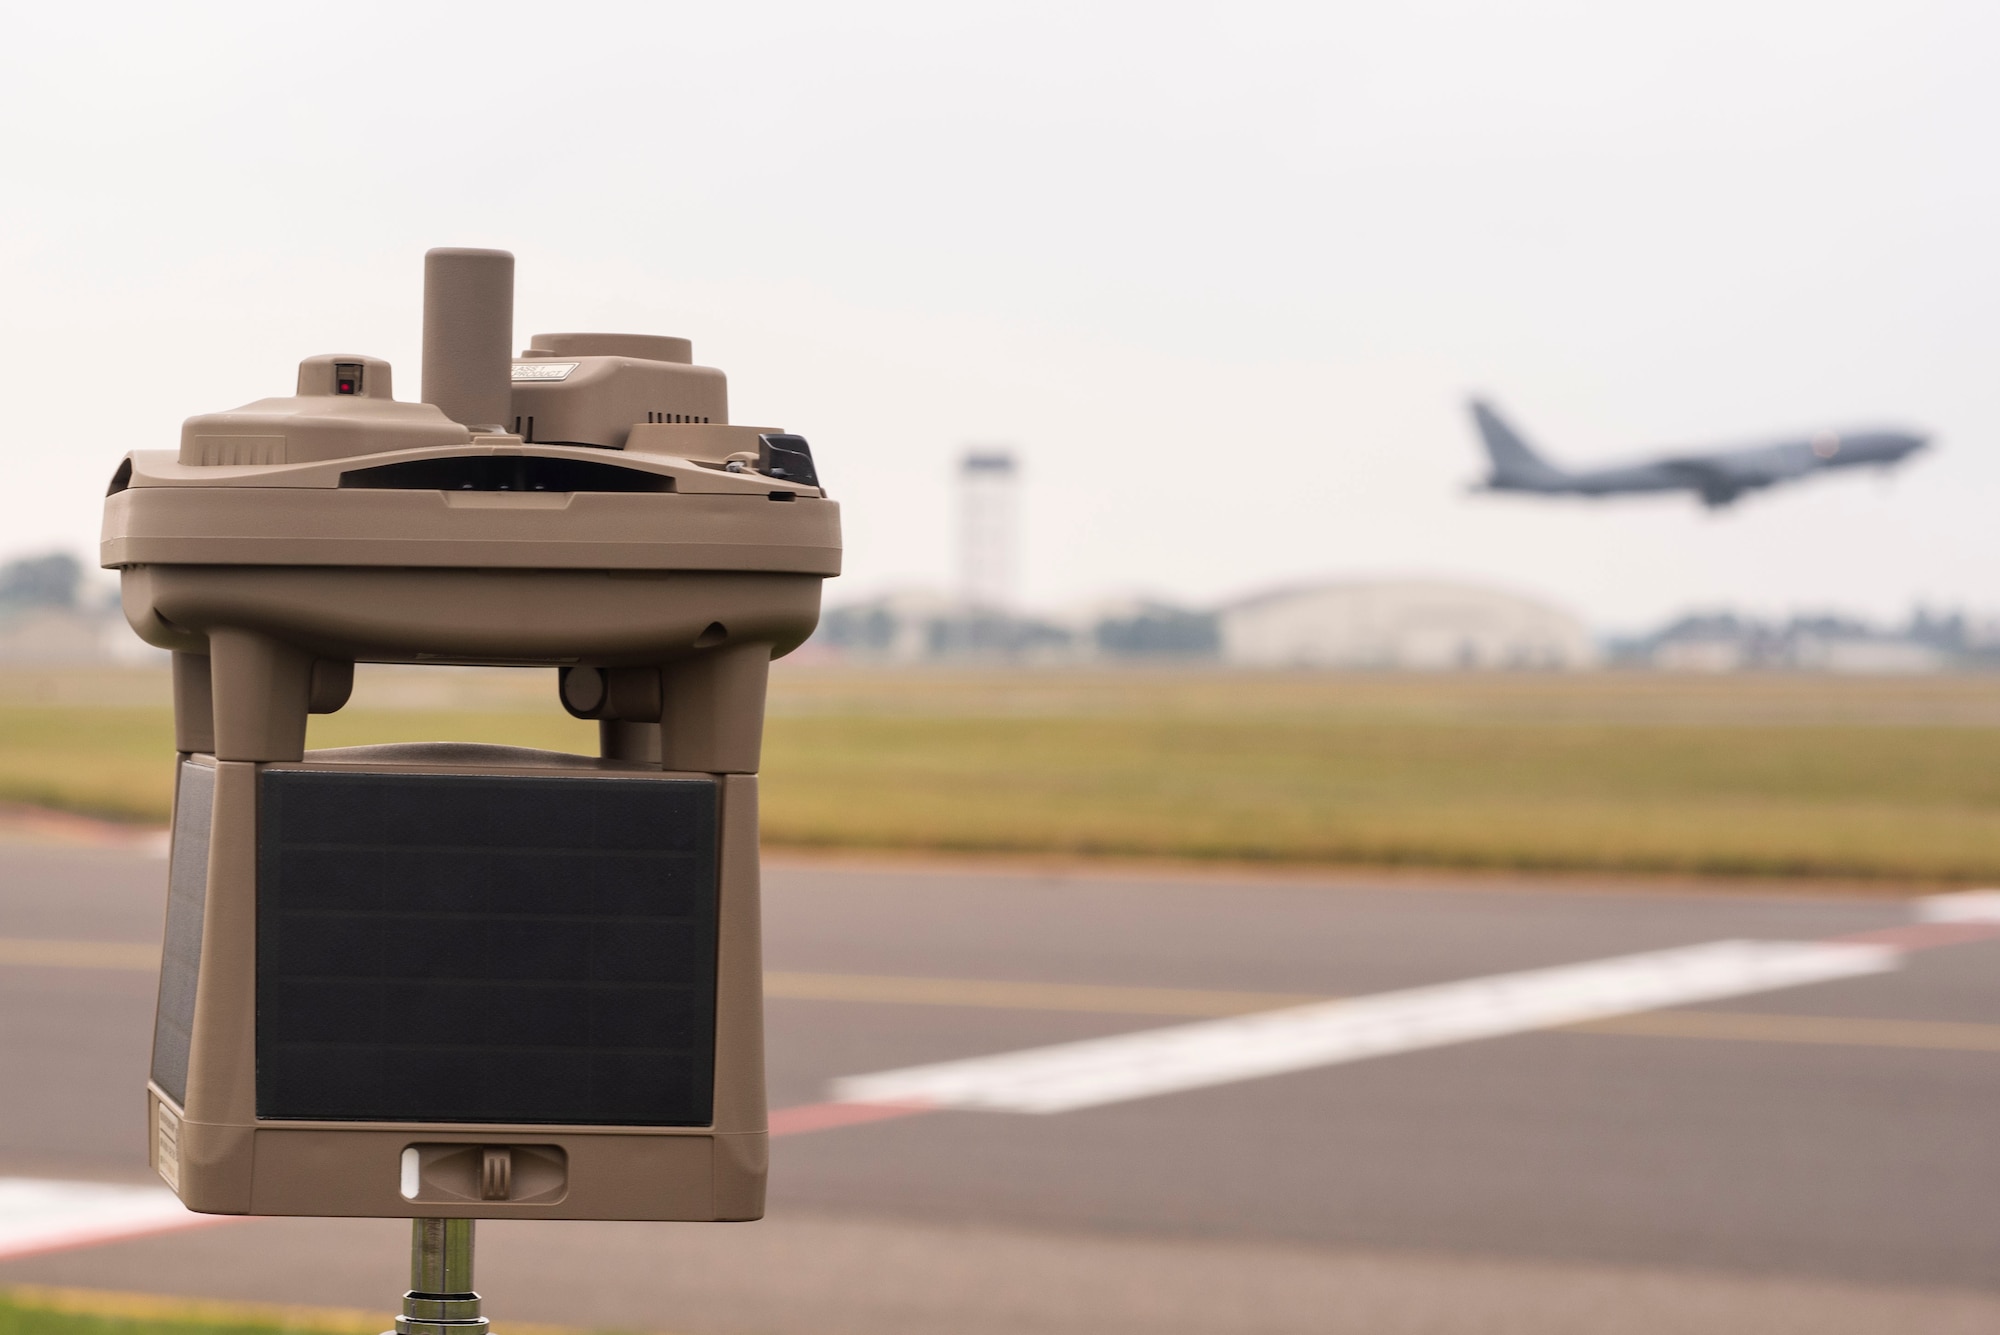 A micro weather sensor sits on the flight line Sept. 10, 2019, at RAF Mildenhall, England. The device is able to provide Airmen information on cloud height, cloud coverage, wind speed and direction, precipitation, lighting detection and atmospheric pressure. (U.S. Air Force photo by Airman 1st Class)